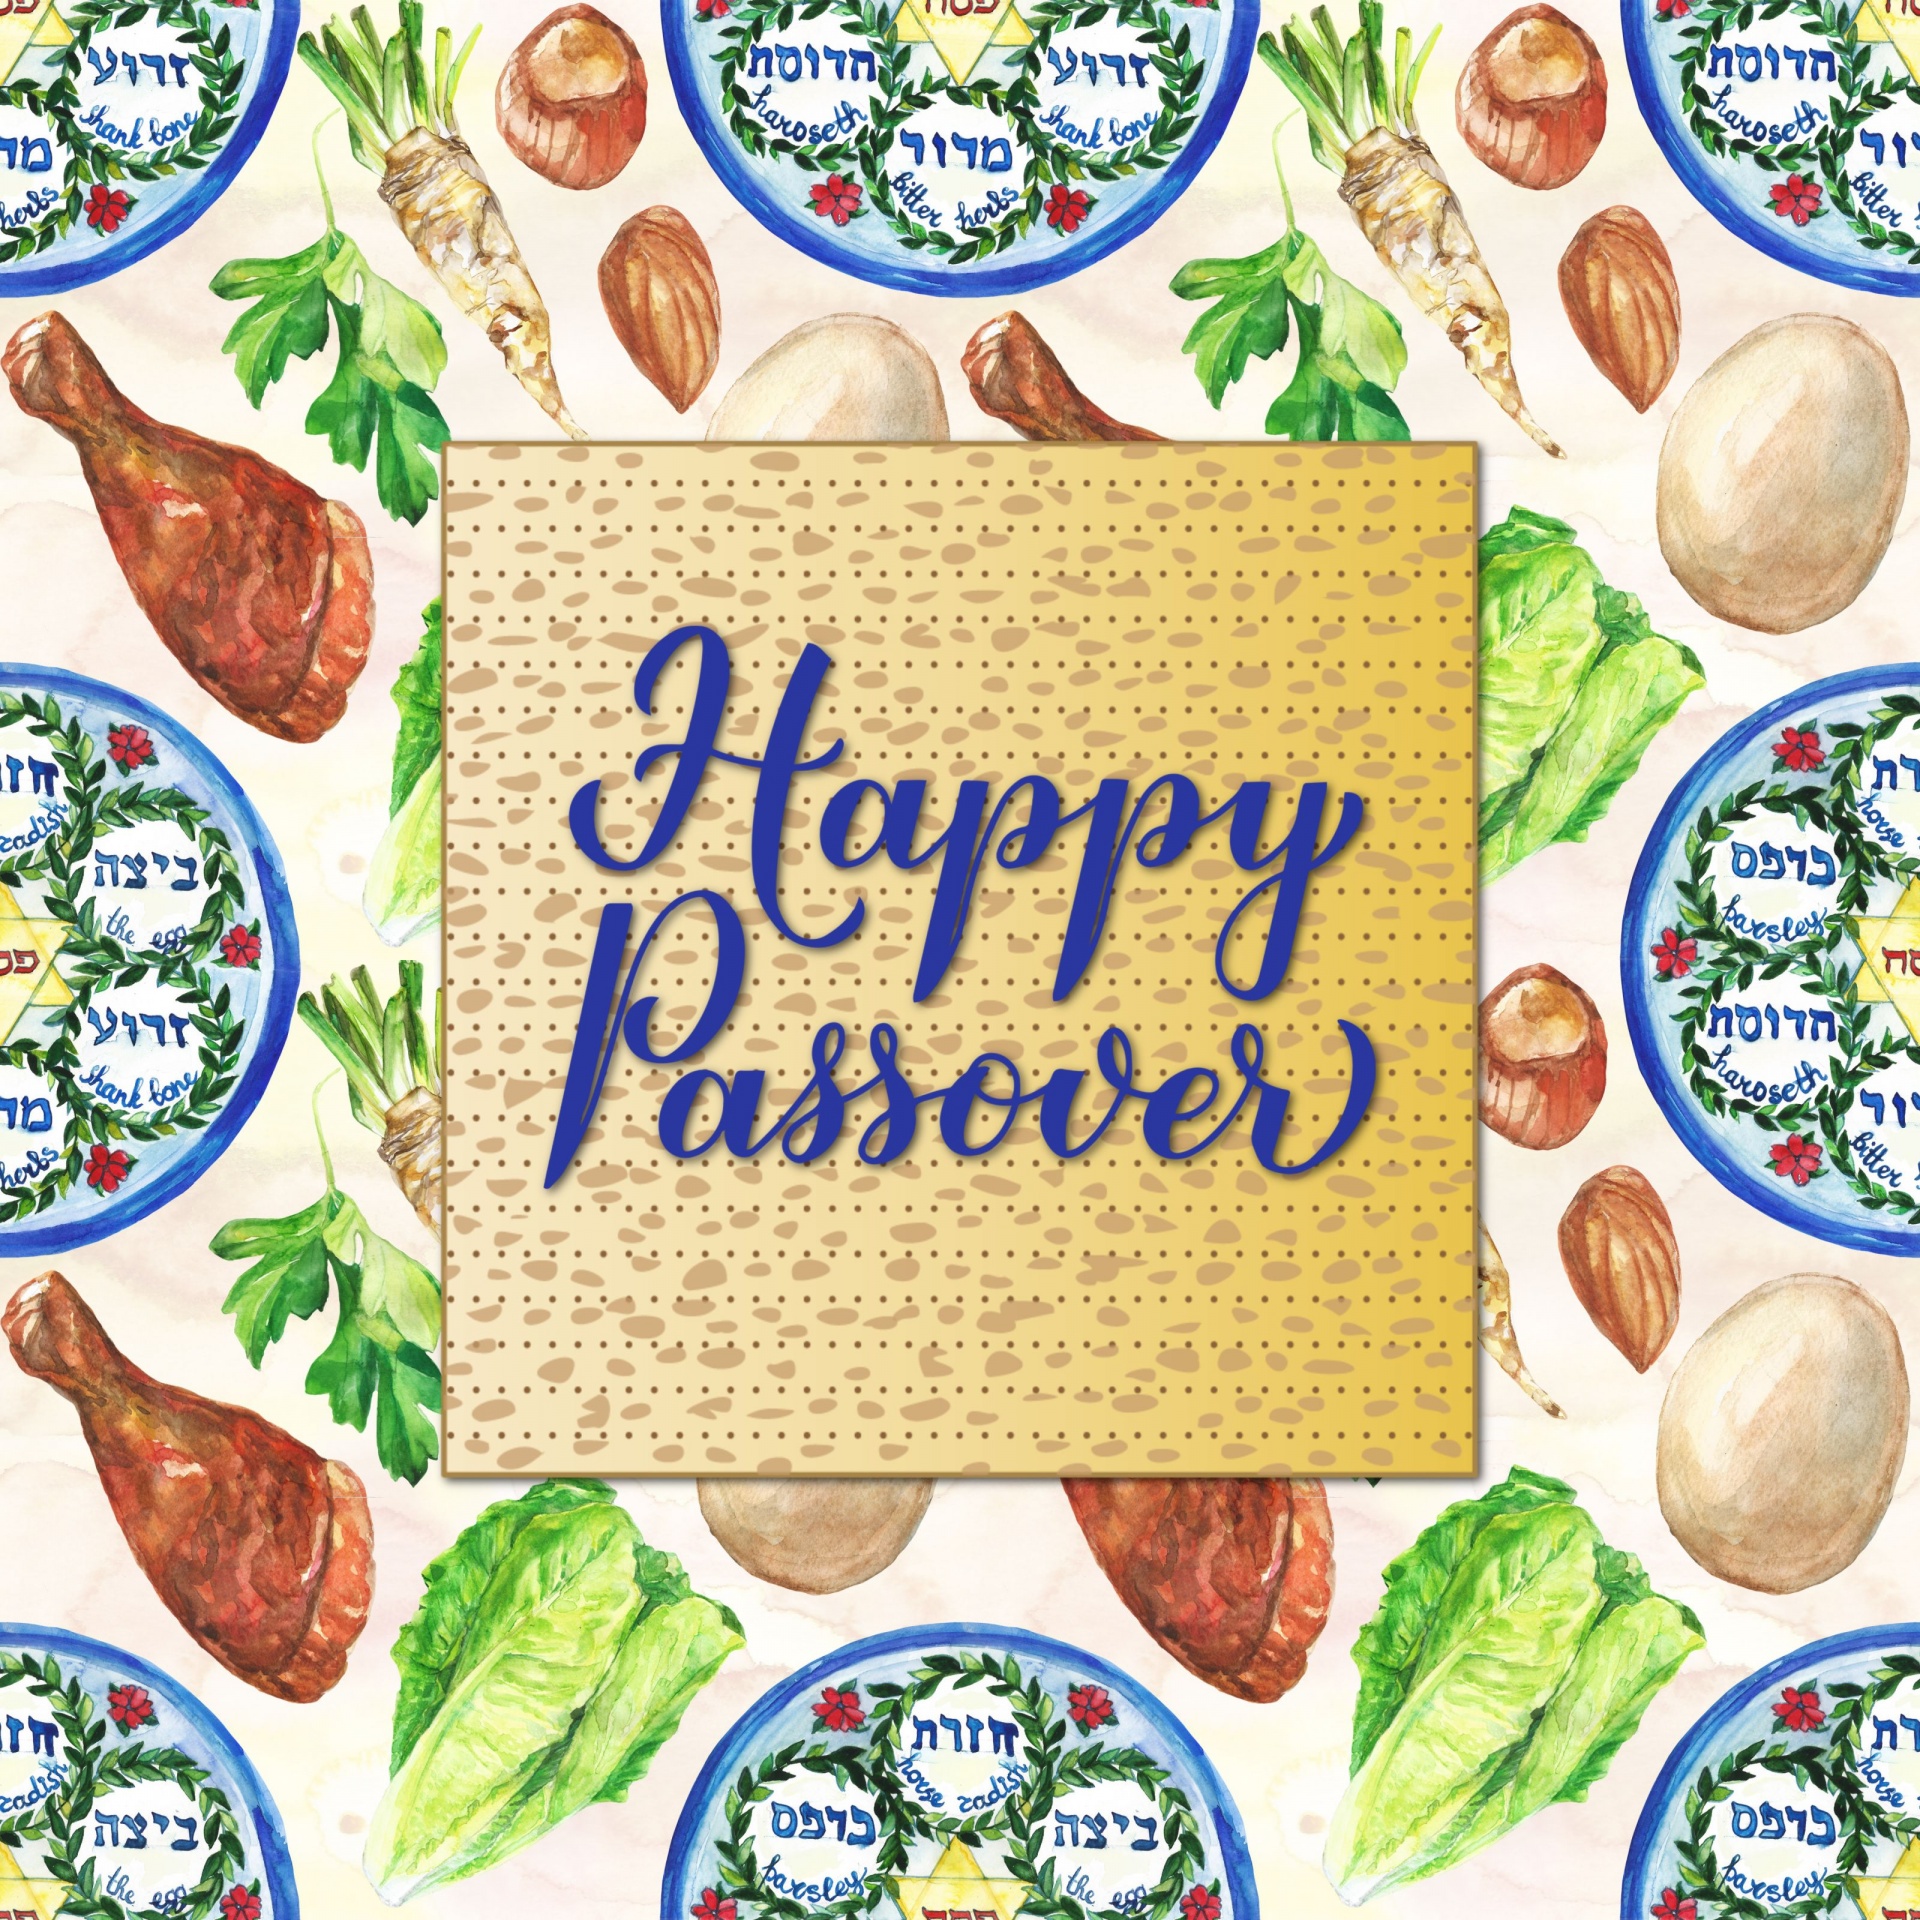 Passover Greeting Poster